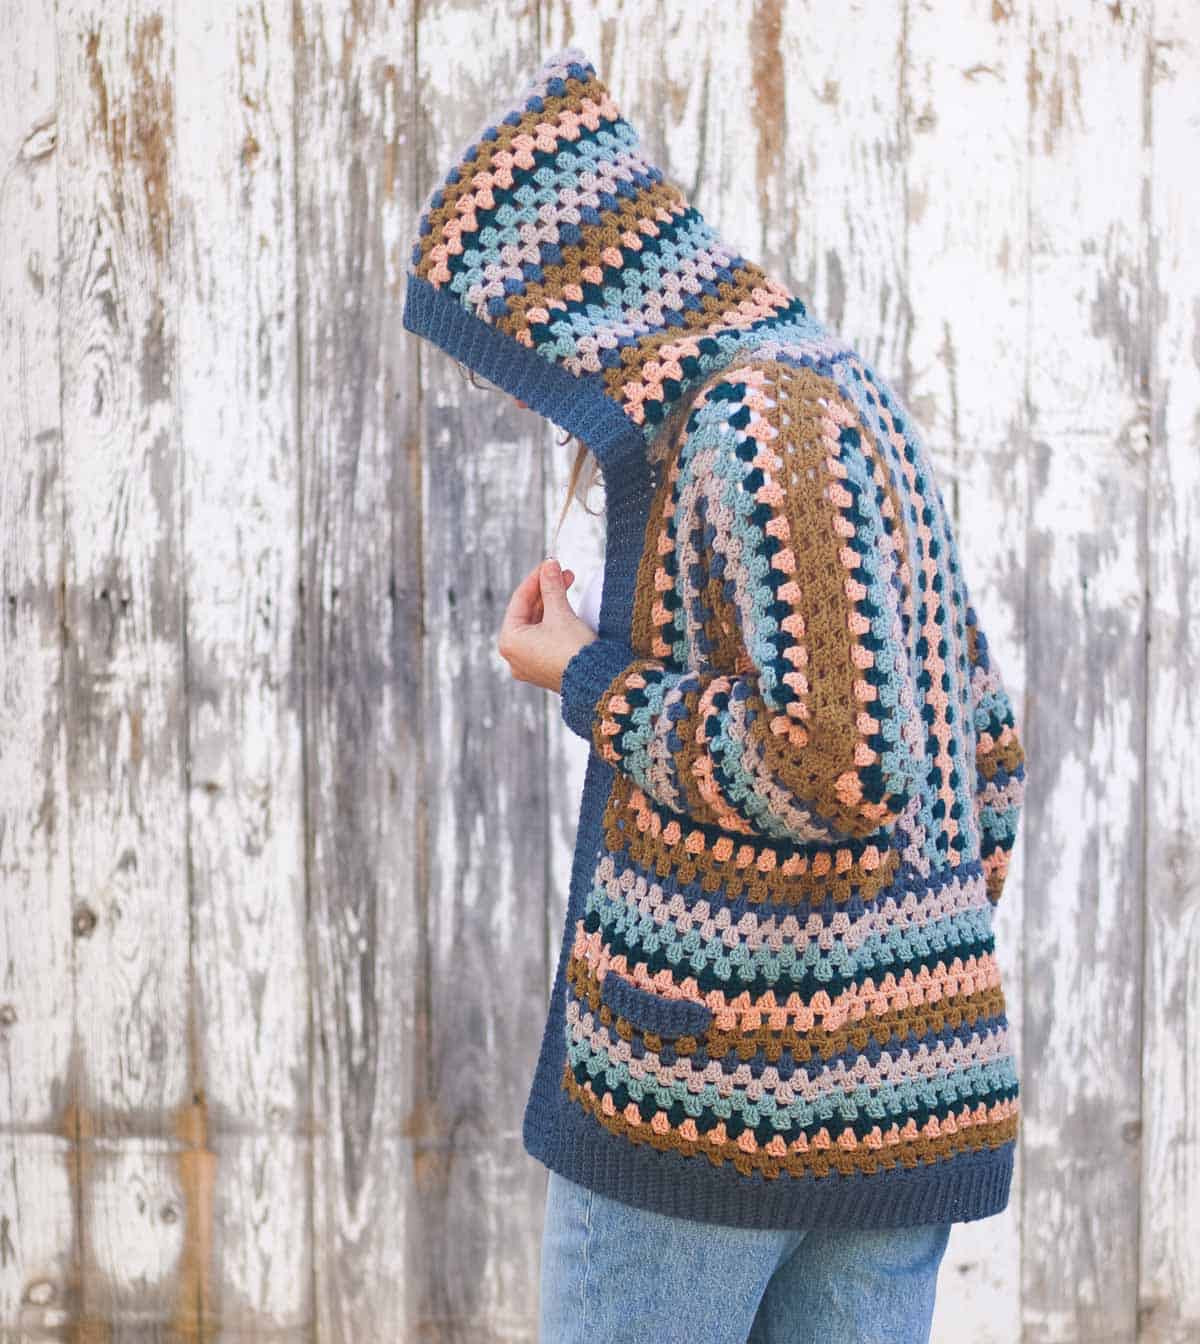 Woman wearing a crocheted hexagon cardigan with a hood hiding her face.